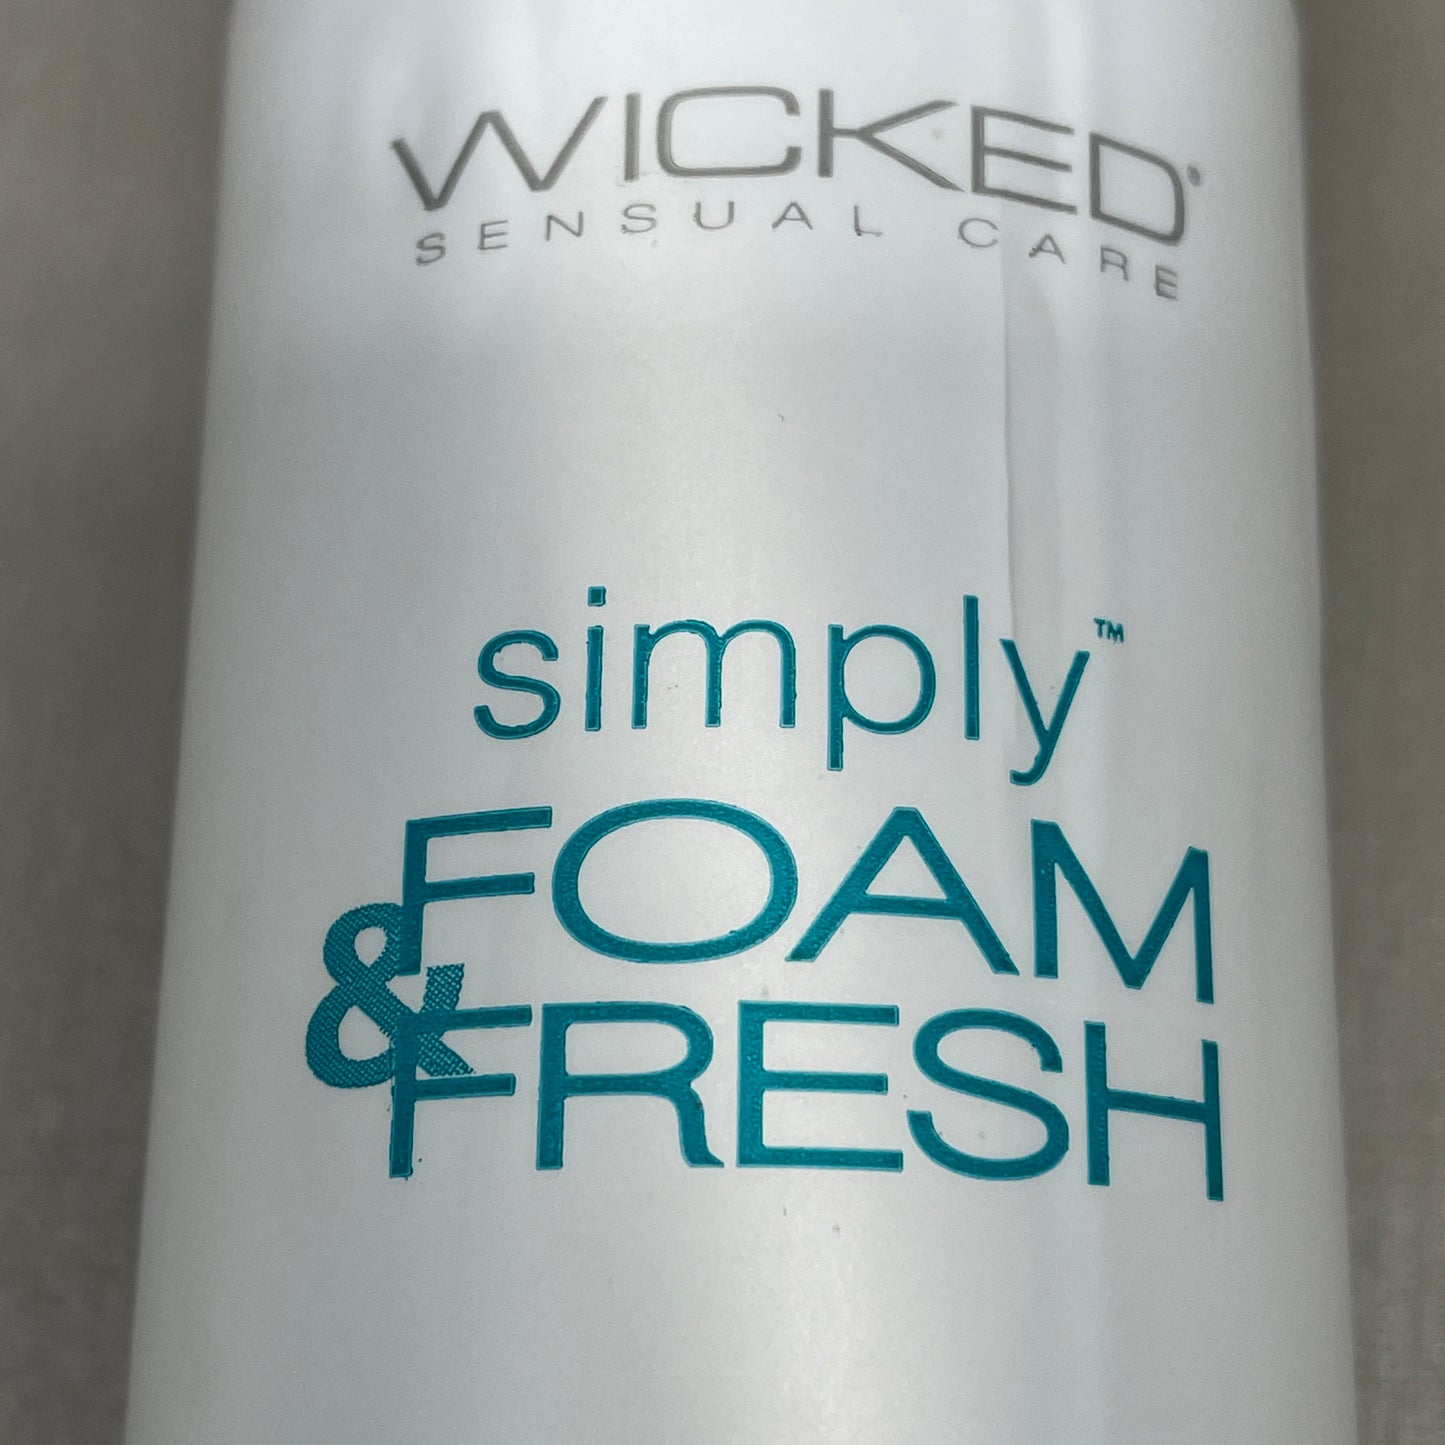 WICKED SENSUAL CARE Simply Foam 'n Fresh Clean & Simple Anti-Bacterial Foaming Toy Cleaner Enhanced w/ Olive Leaf Extract 7 oz (New)